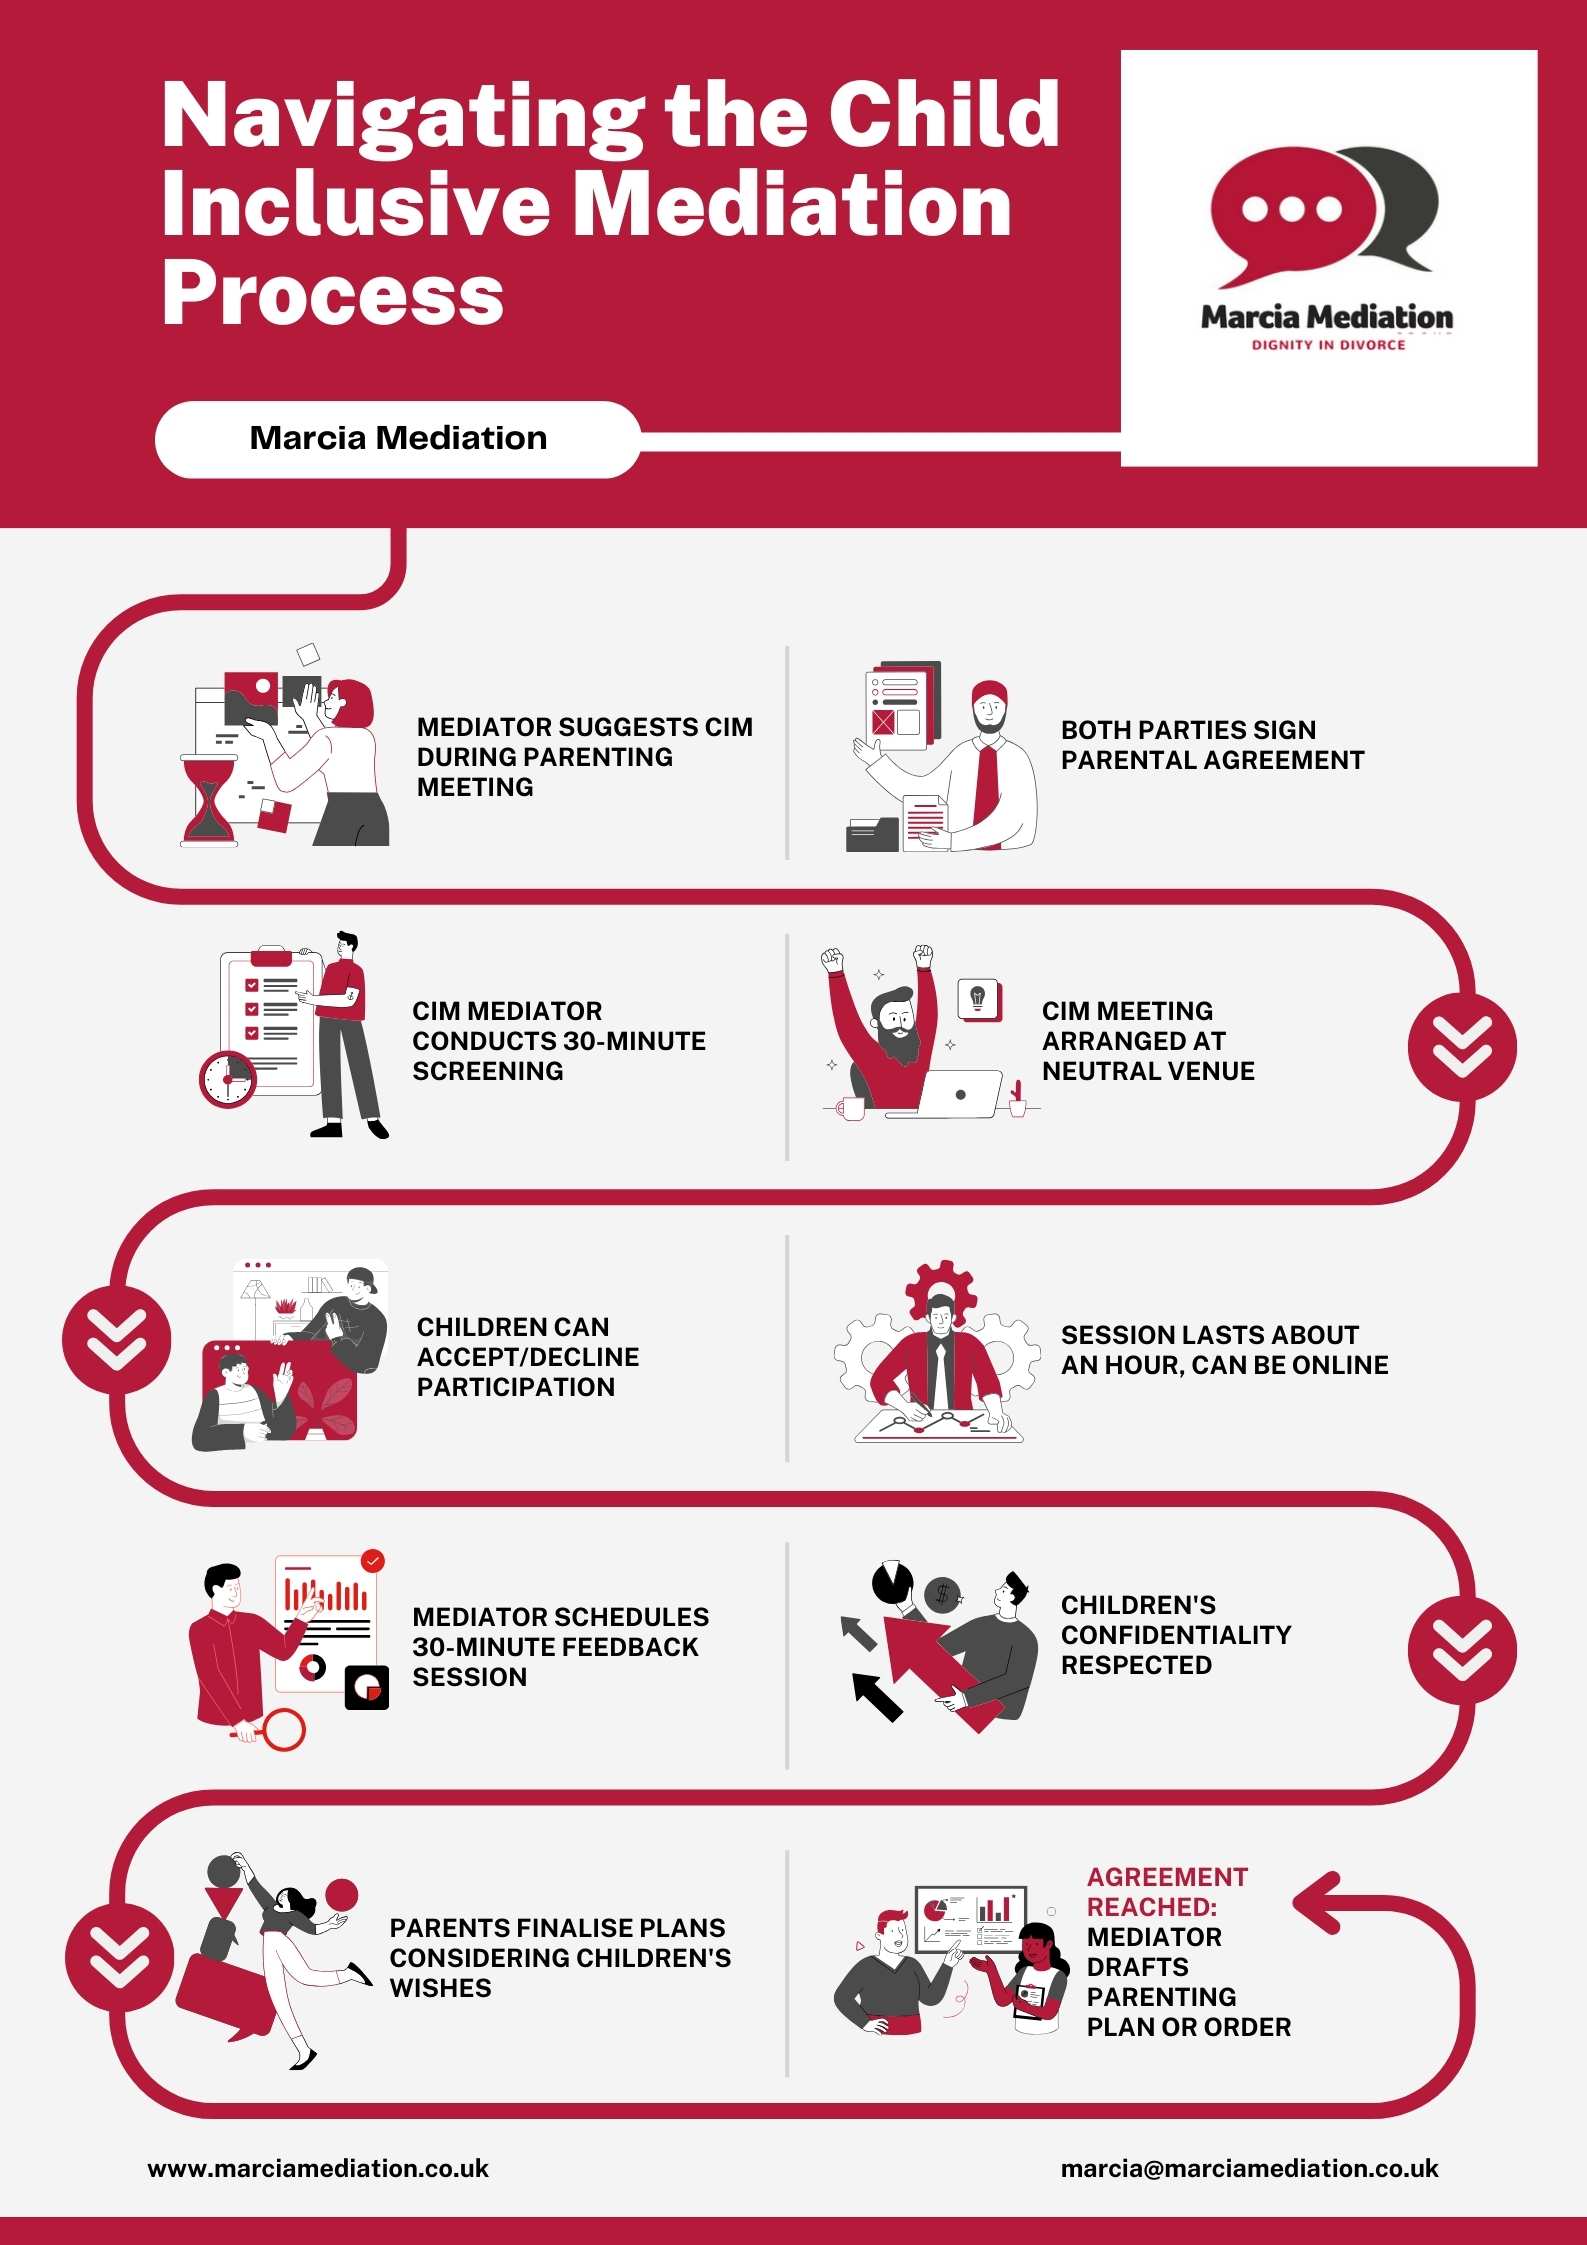 Child inclusive mediaiton infographic explaining the steps taken during the process